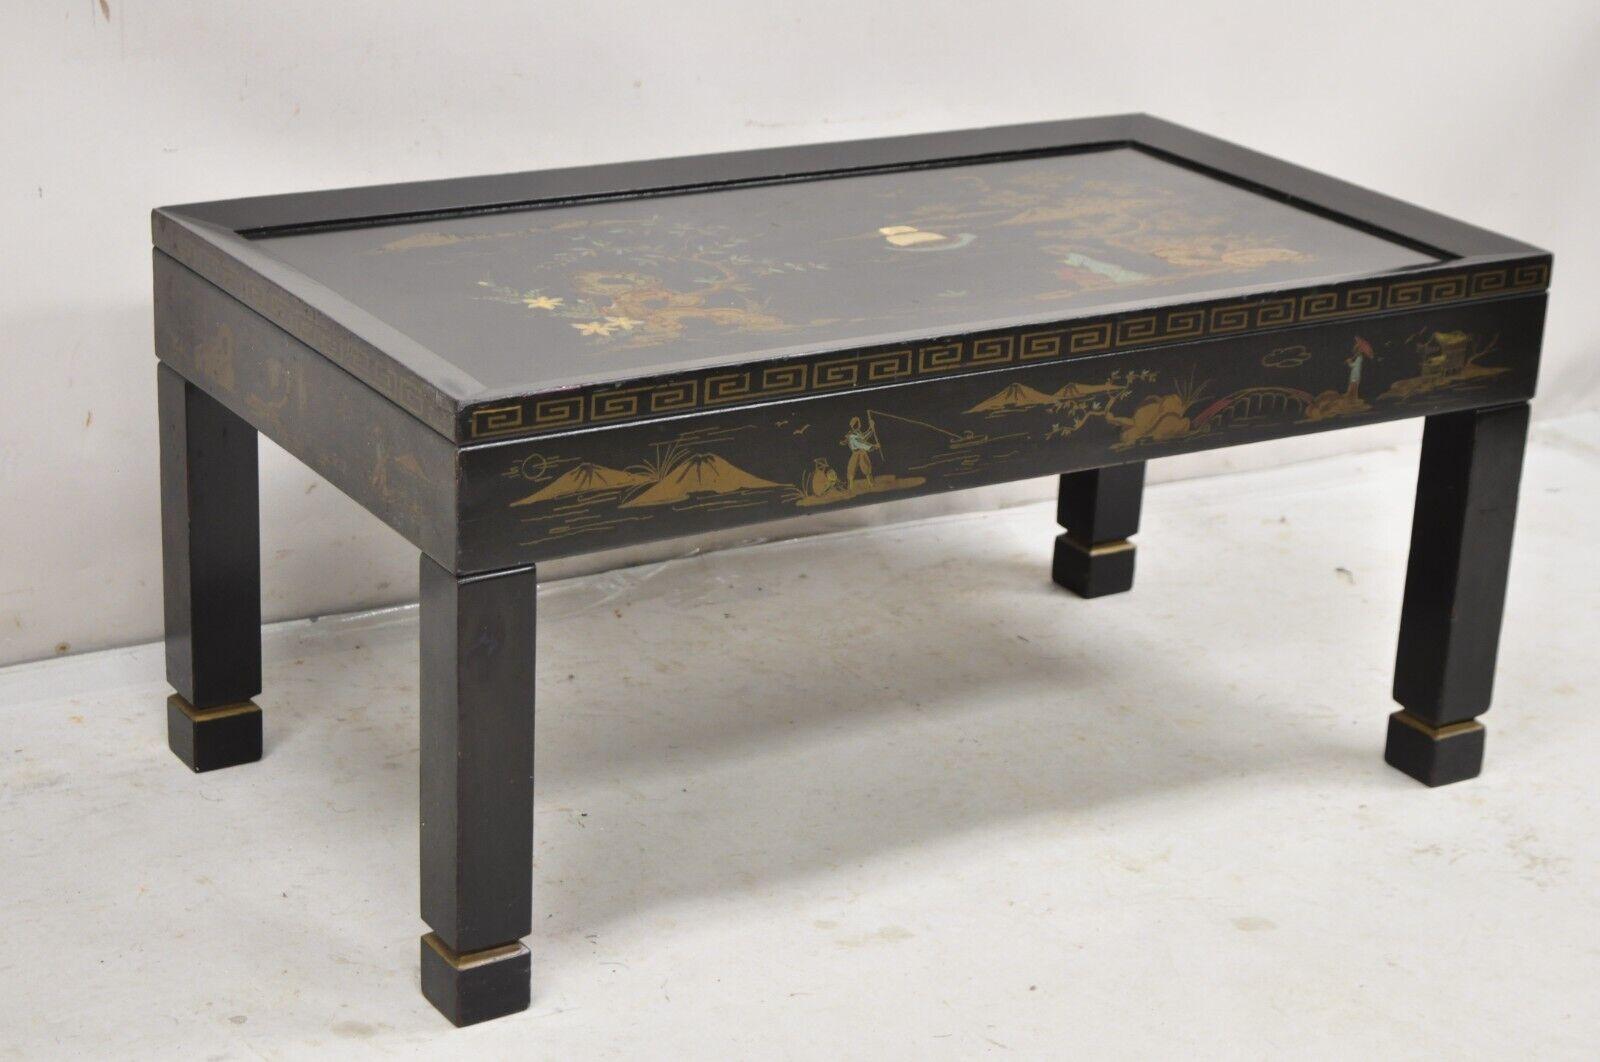 Vintage Katherine Henick Chinoiserie Chinese Black Hand Painted Coffee Table, Signed by Artist. Circa Mid 20th Century.
Measurements: 17